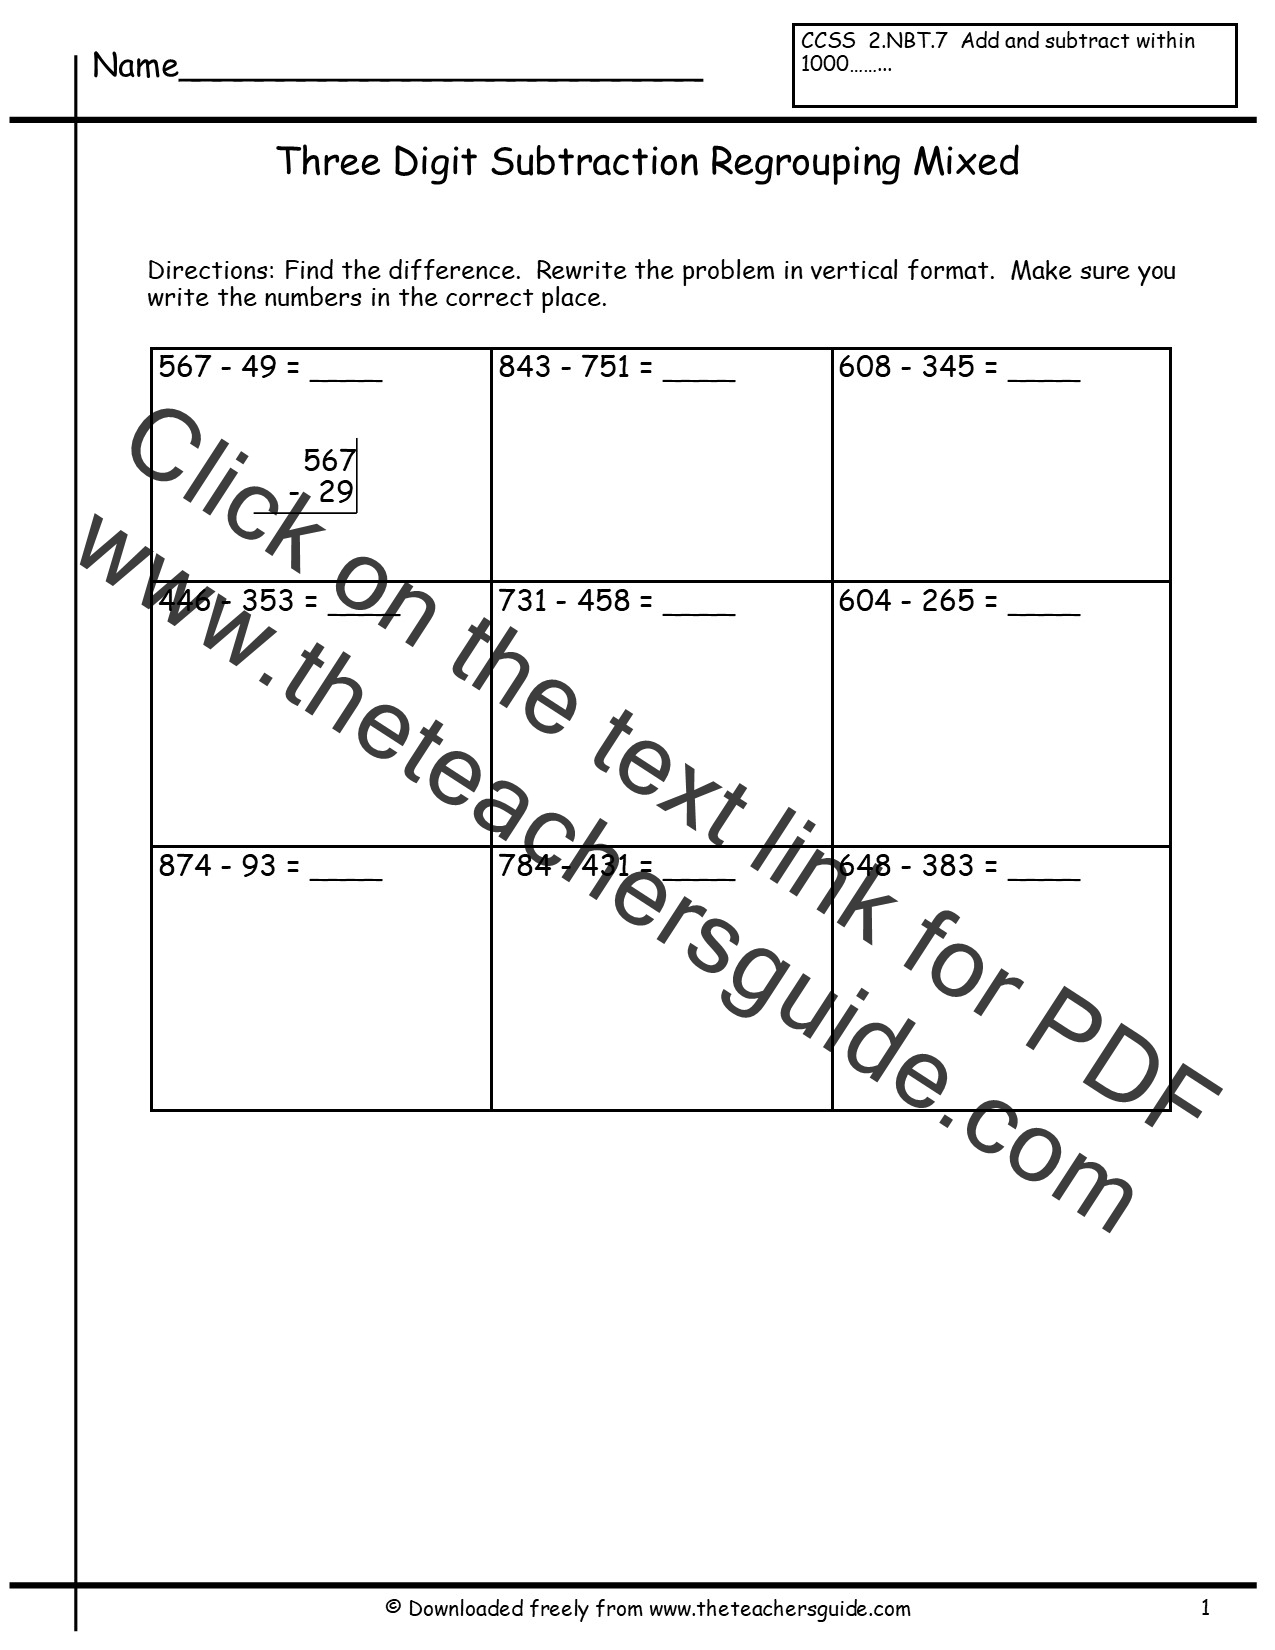 three-digit-subtraction-worksheets-from-the-teacher-s-guide